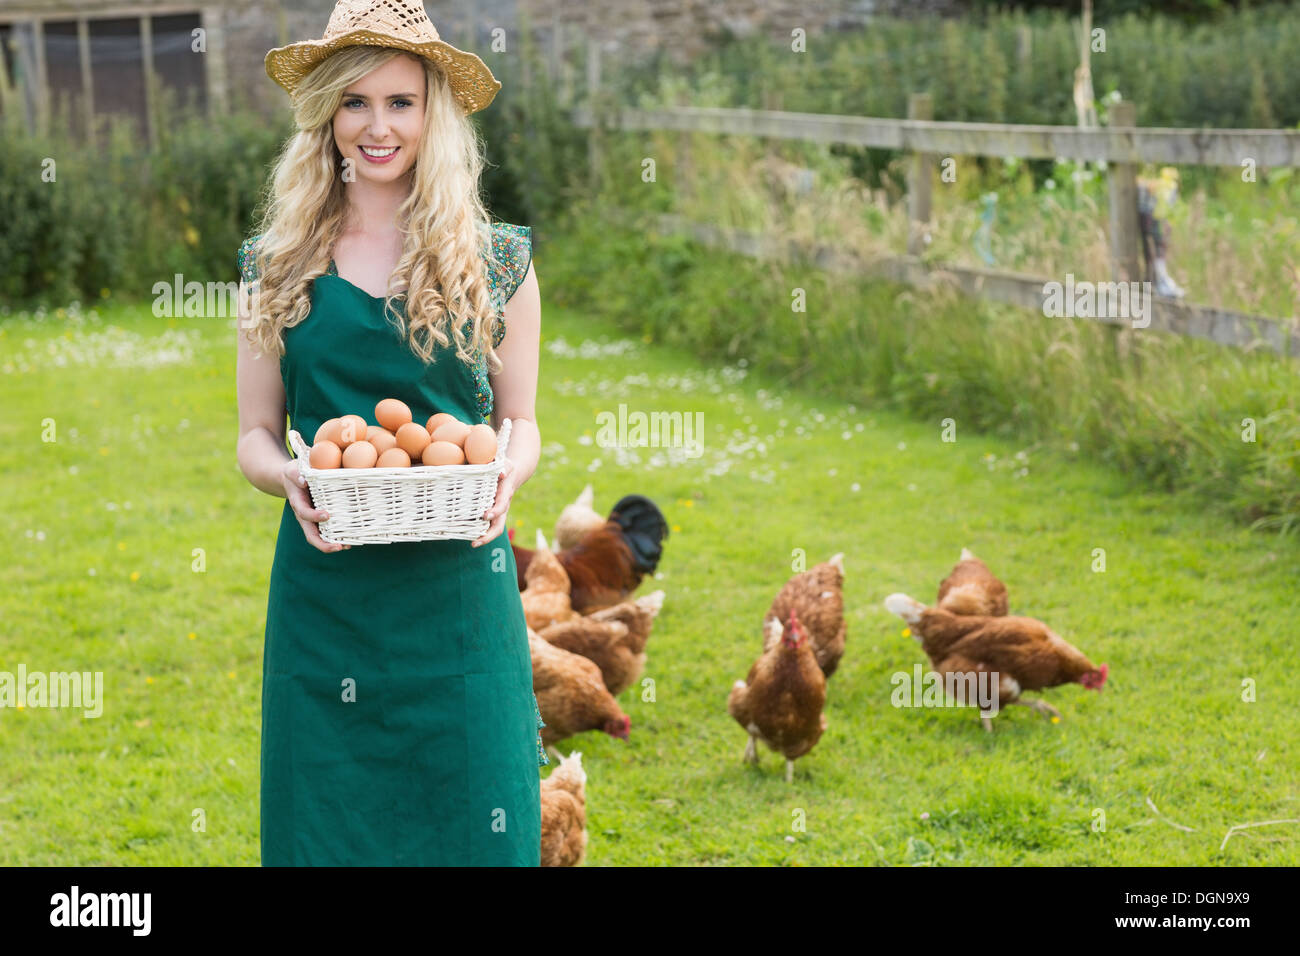 Young woman showing a basket filled with eggs Stock Photo